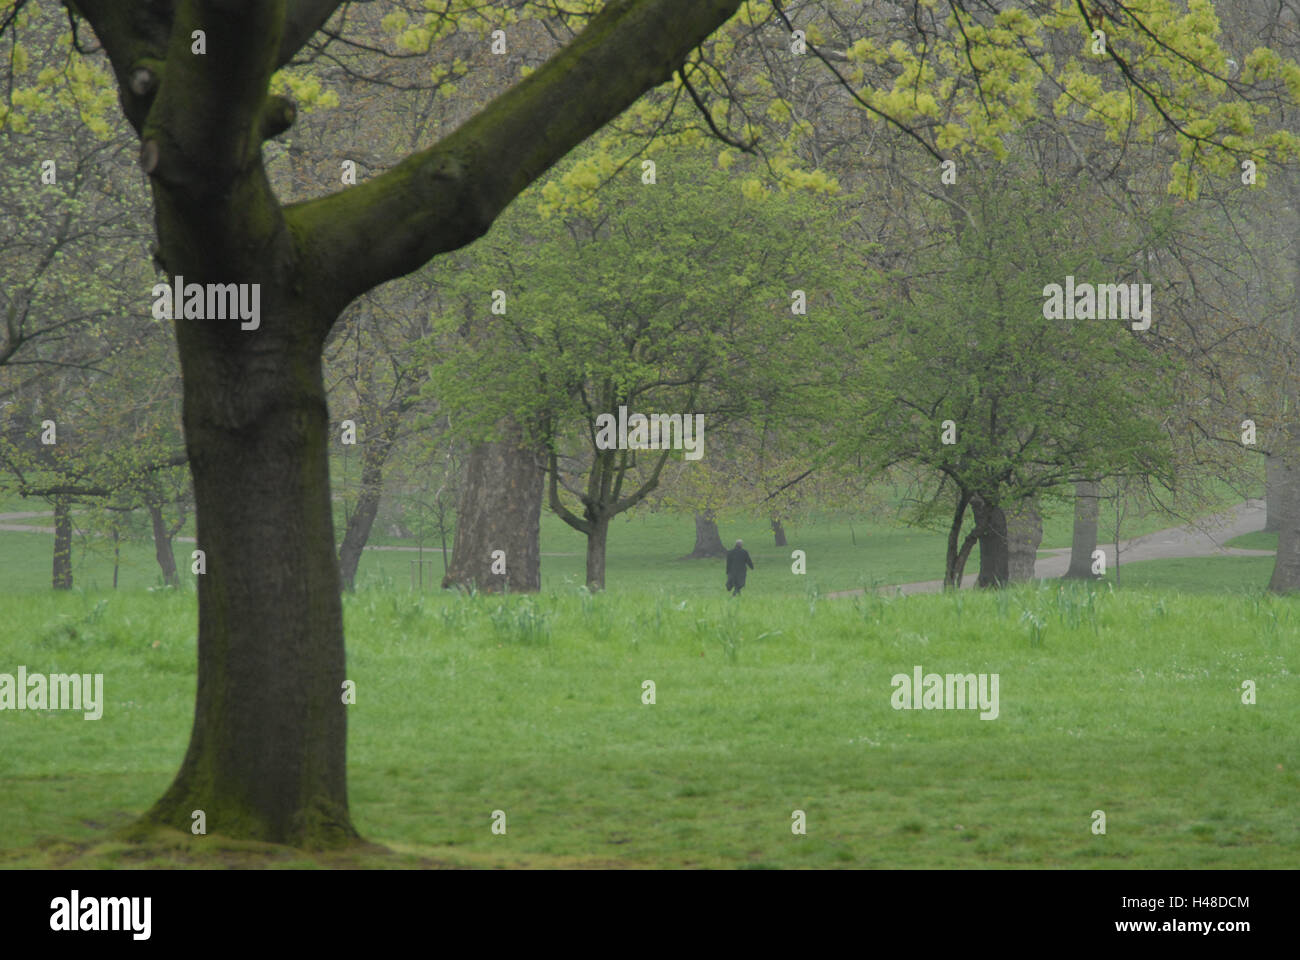 Great Britain, England, London, Hyde Park, fog, Europe, town, city, destination, place of interest, park, meadow, trees, nature, dreary, cloudily, foggy, way, man, person, loneliness, Stock Photo